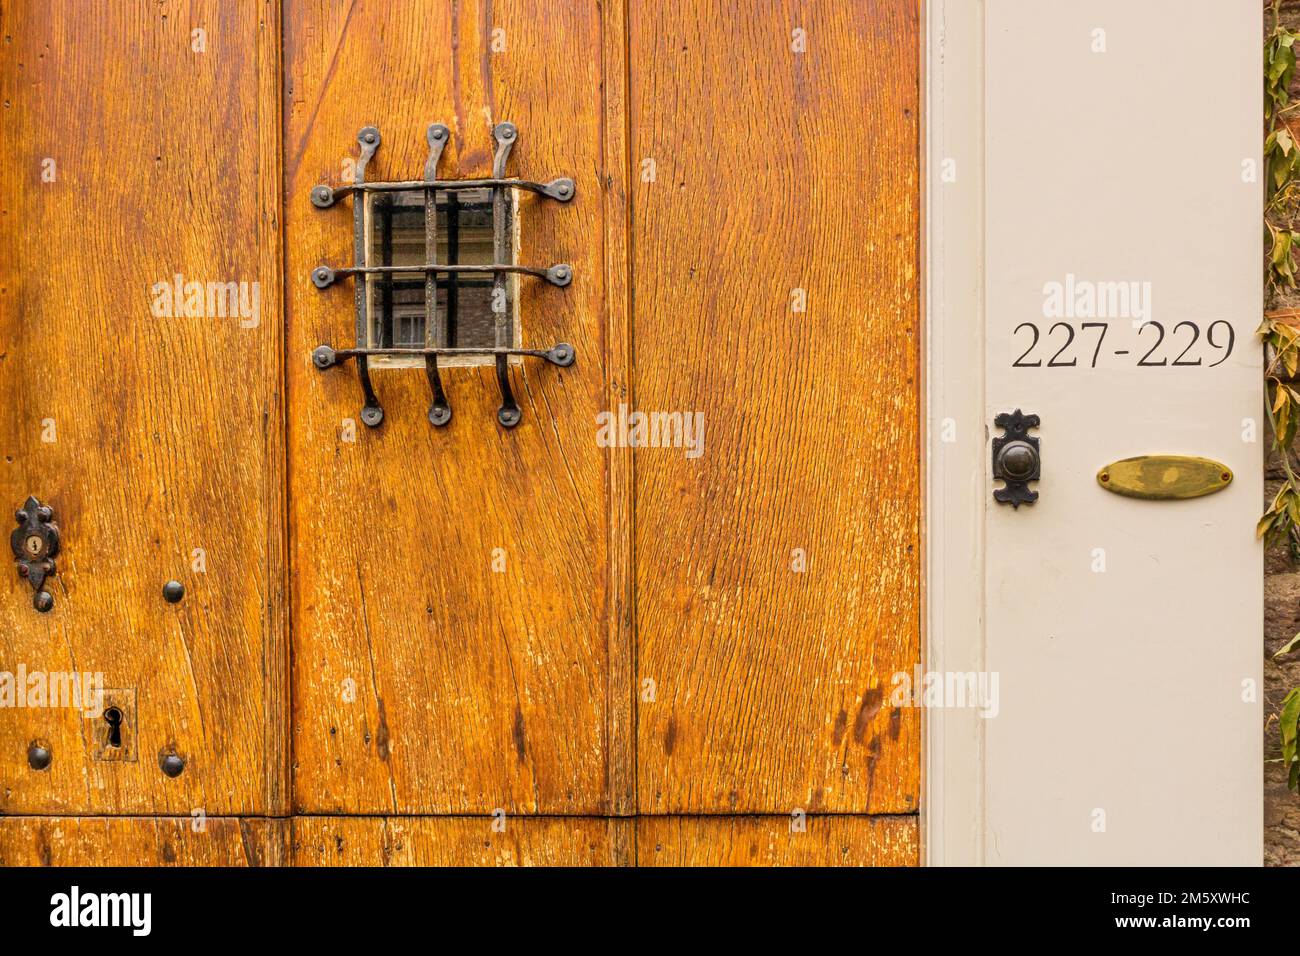 A closeup of peephole, doorbell and house numbers on old wooden front door Stock Photo